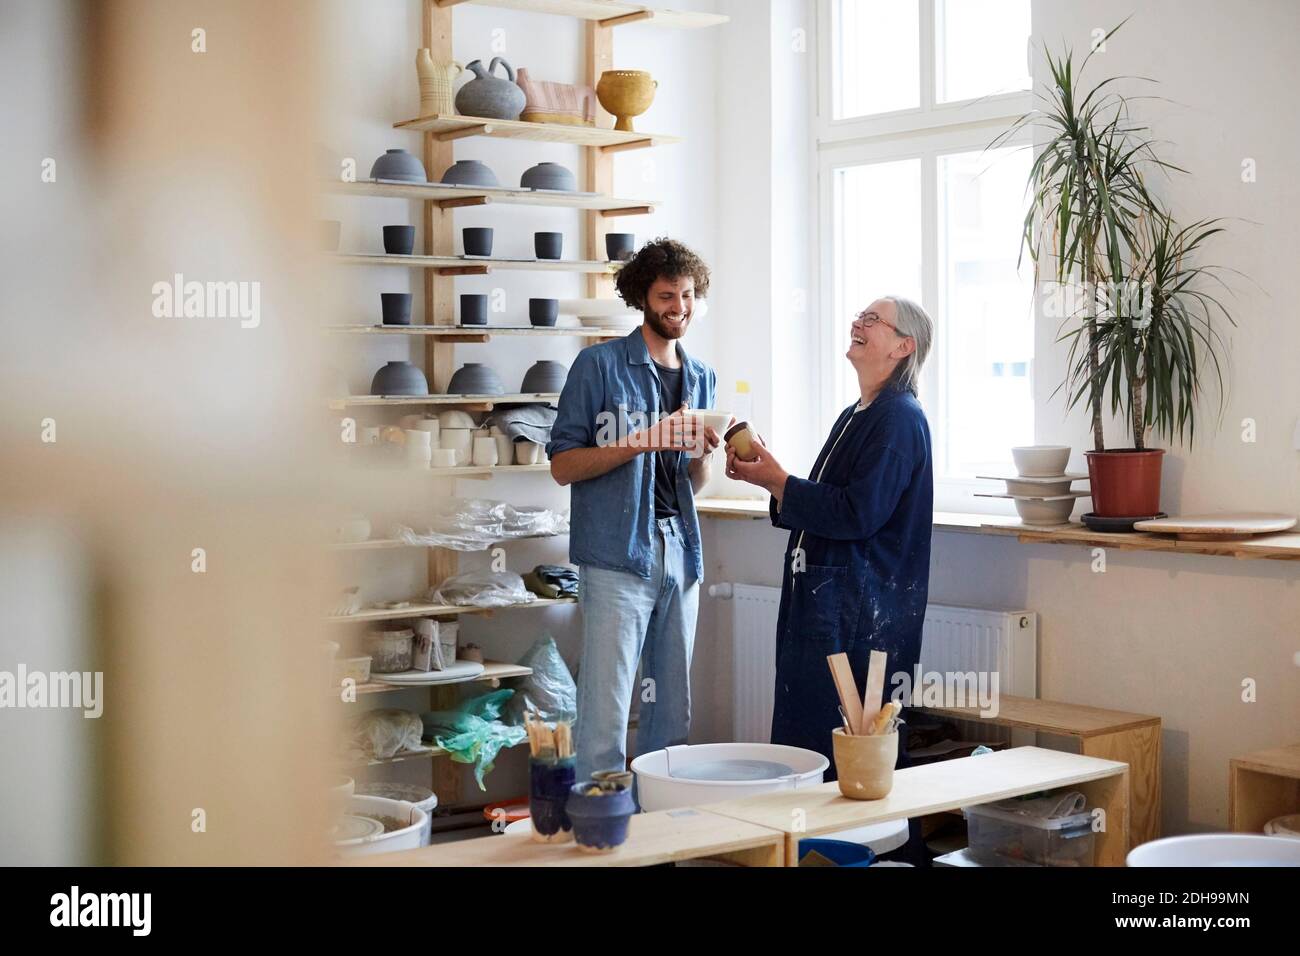 Smiling man and woman in art class Stock Photo